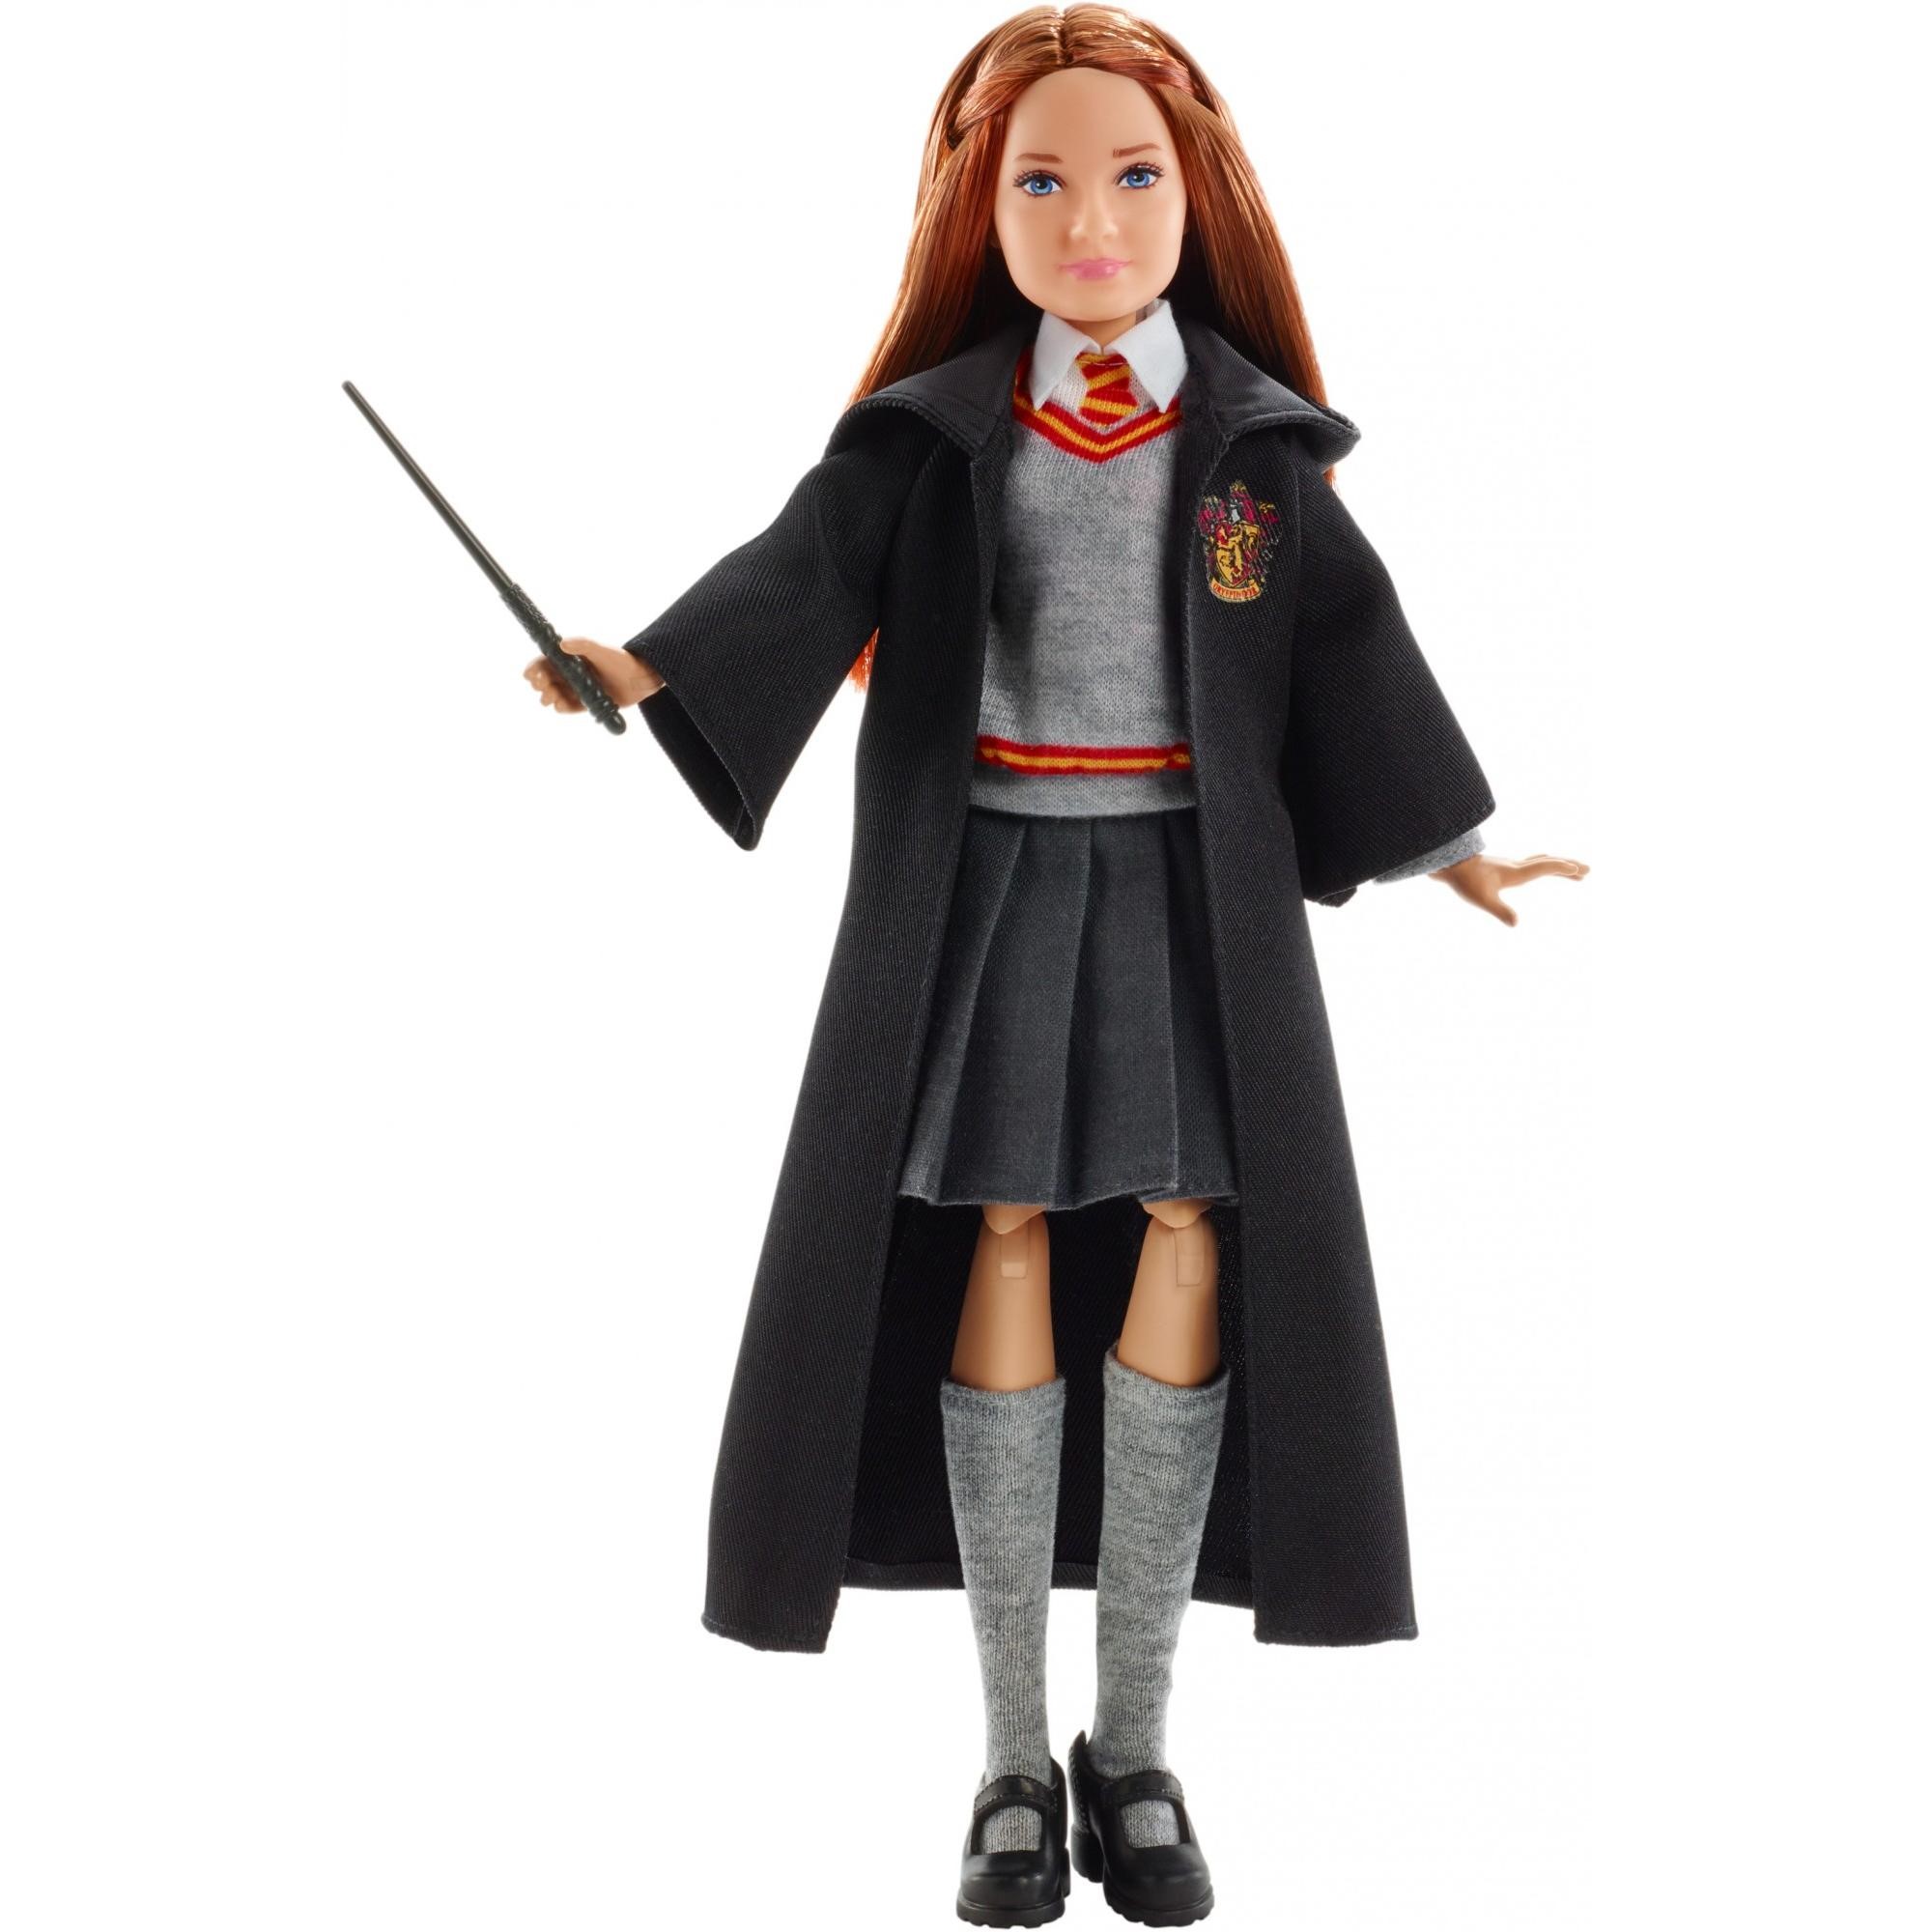 Harry Potter Ginny Weasley Film-Inspired Collector Doll Playset - image 1 of 7